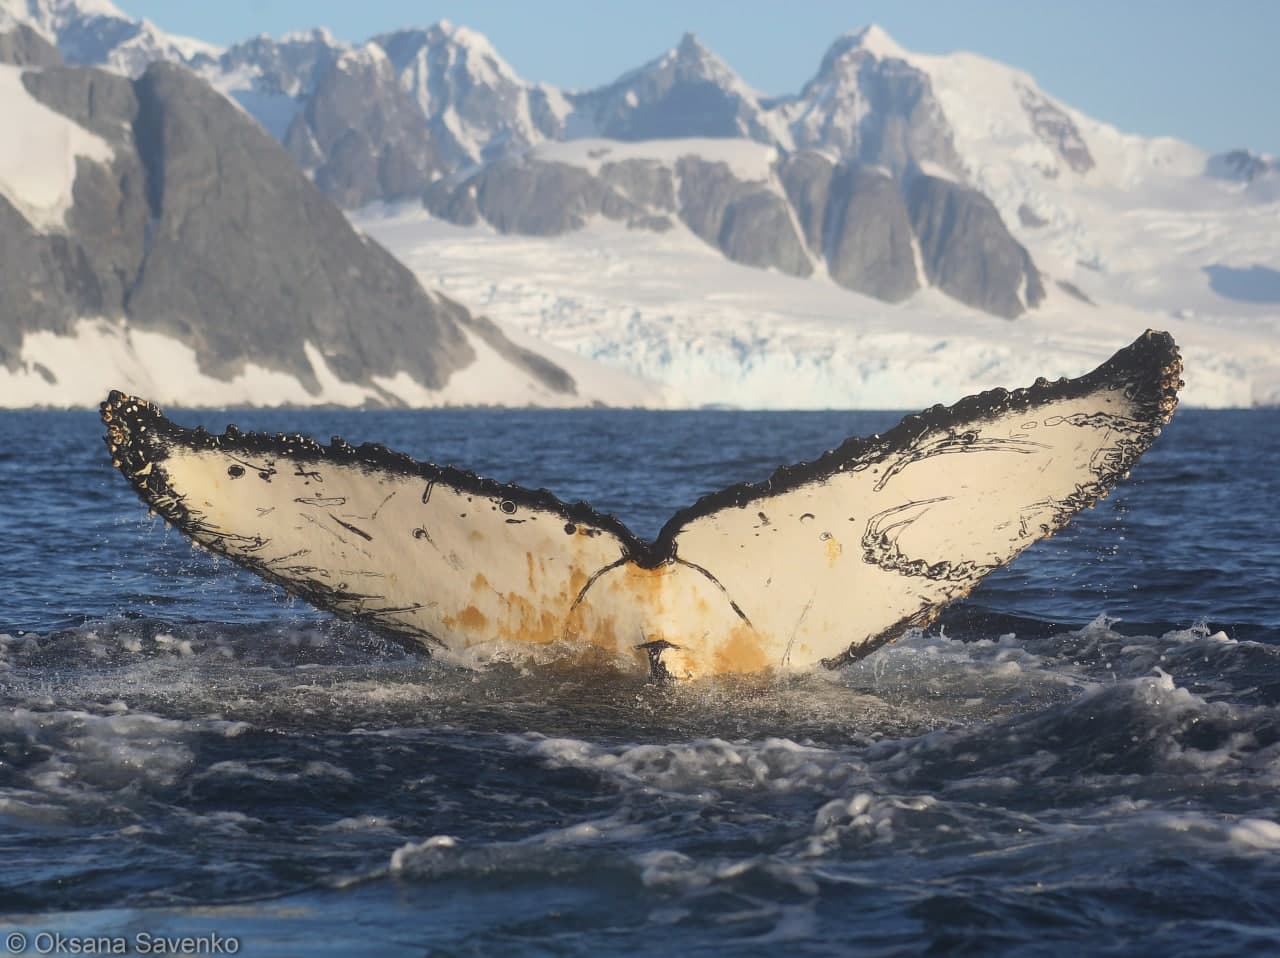 An article about humpback whales with the participation of a Ukrainian female polar explorer was published in a prestigious scientific journal